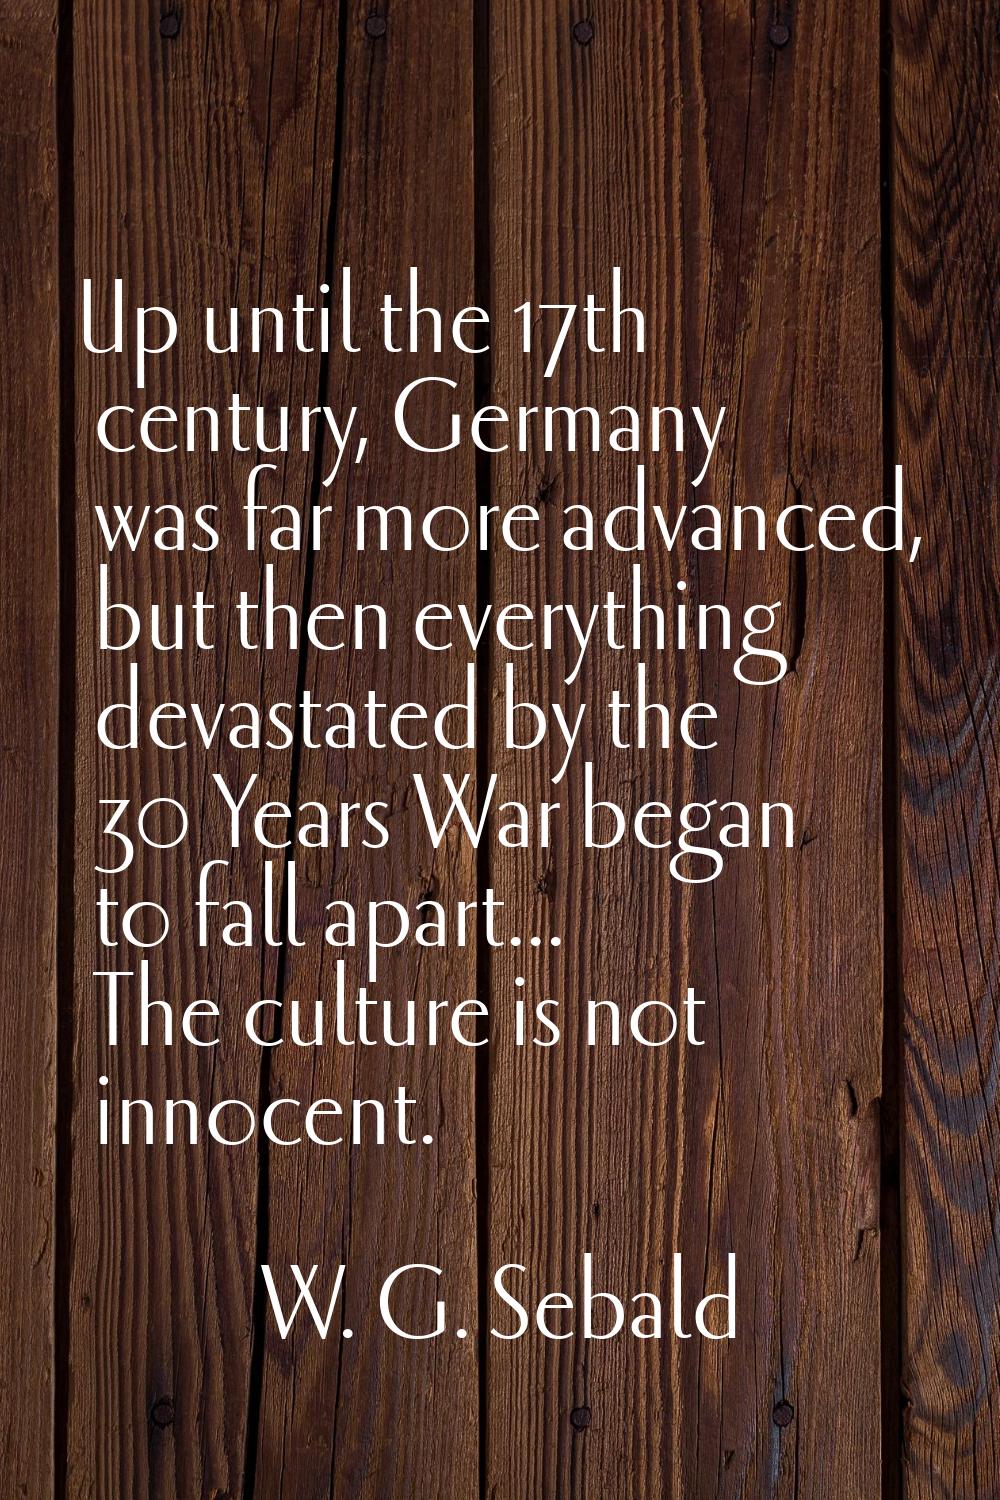 Up until the 17th century, Germany was far more advanced, but then everything devastated by the 30 